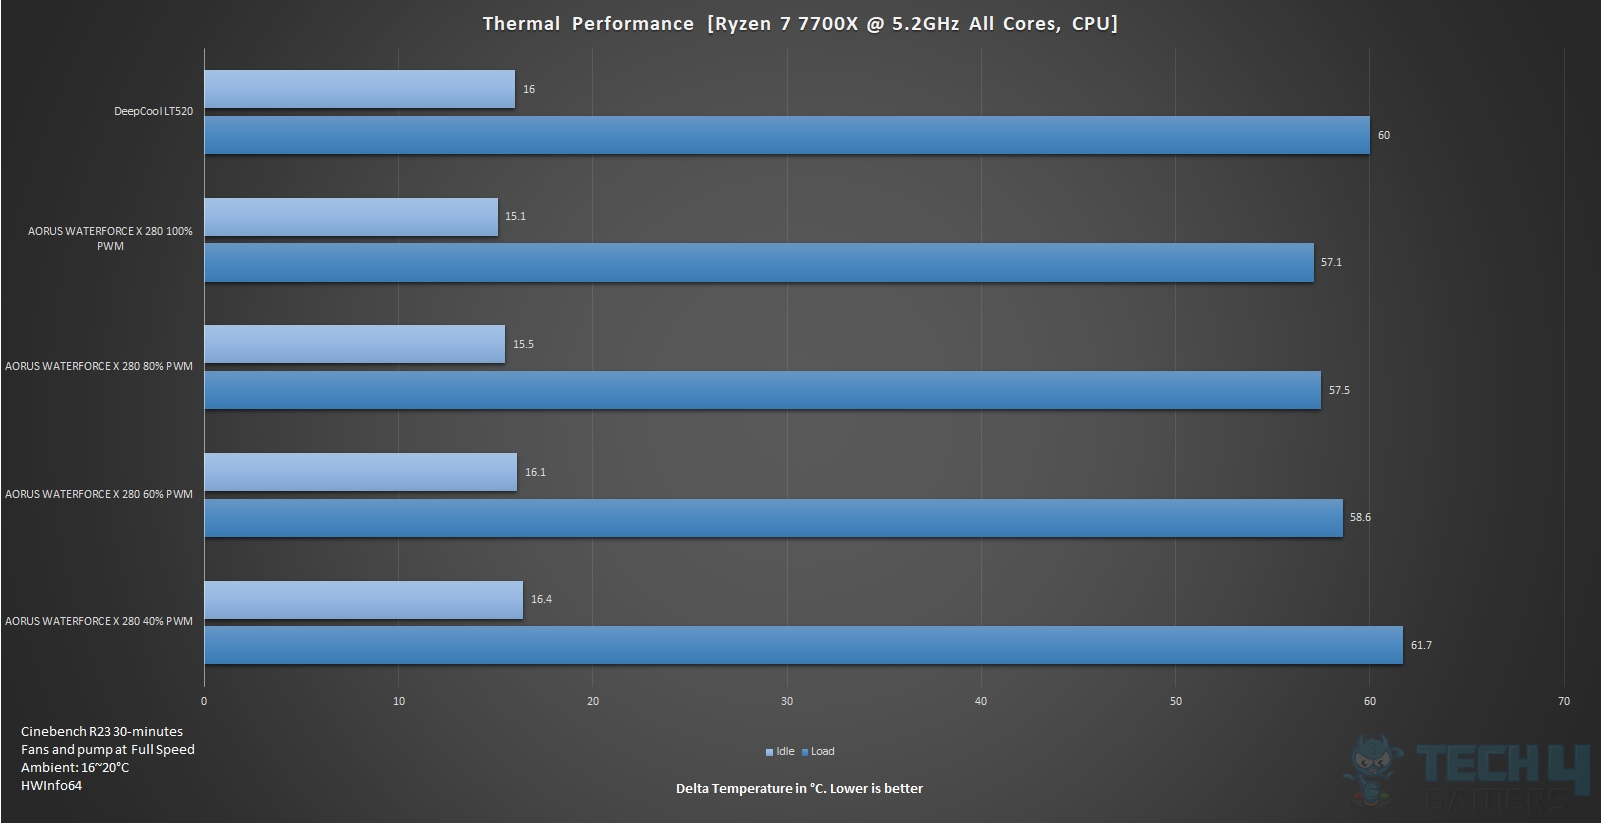 AORUS WATERFORCE X 280 Final thermal performance results